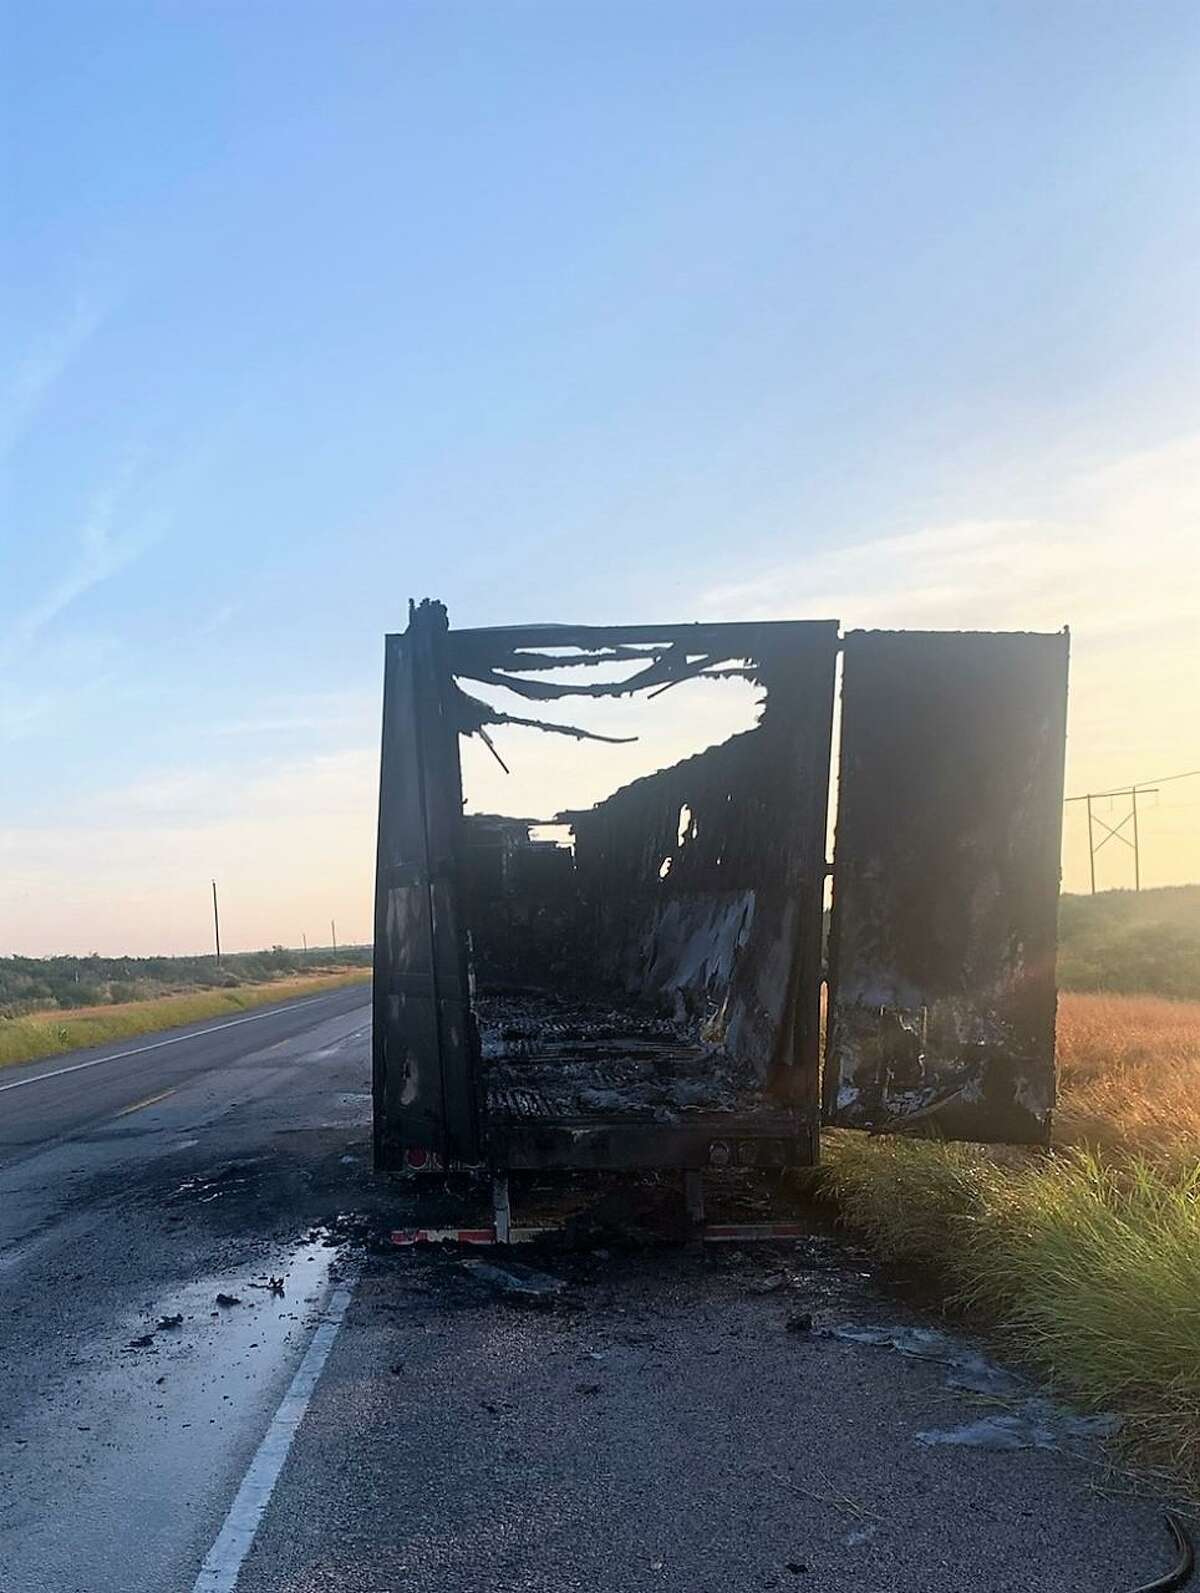 U.S. Border Patrol agents said 64 migrants were being transported in this trailer. It’s not clear what caused the fire. Agents encountered the migrants after canvassing the surrounding area.